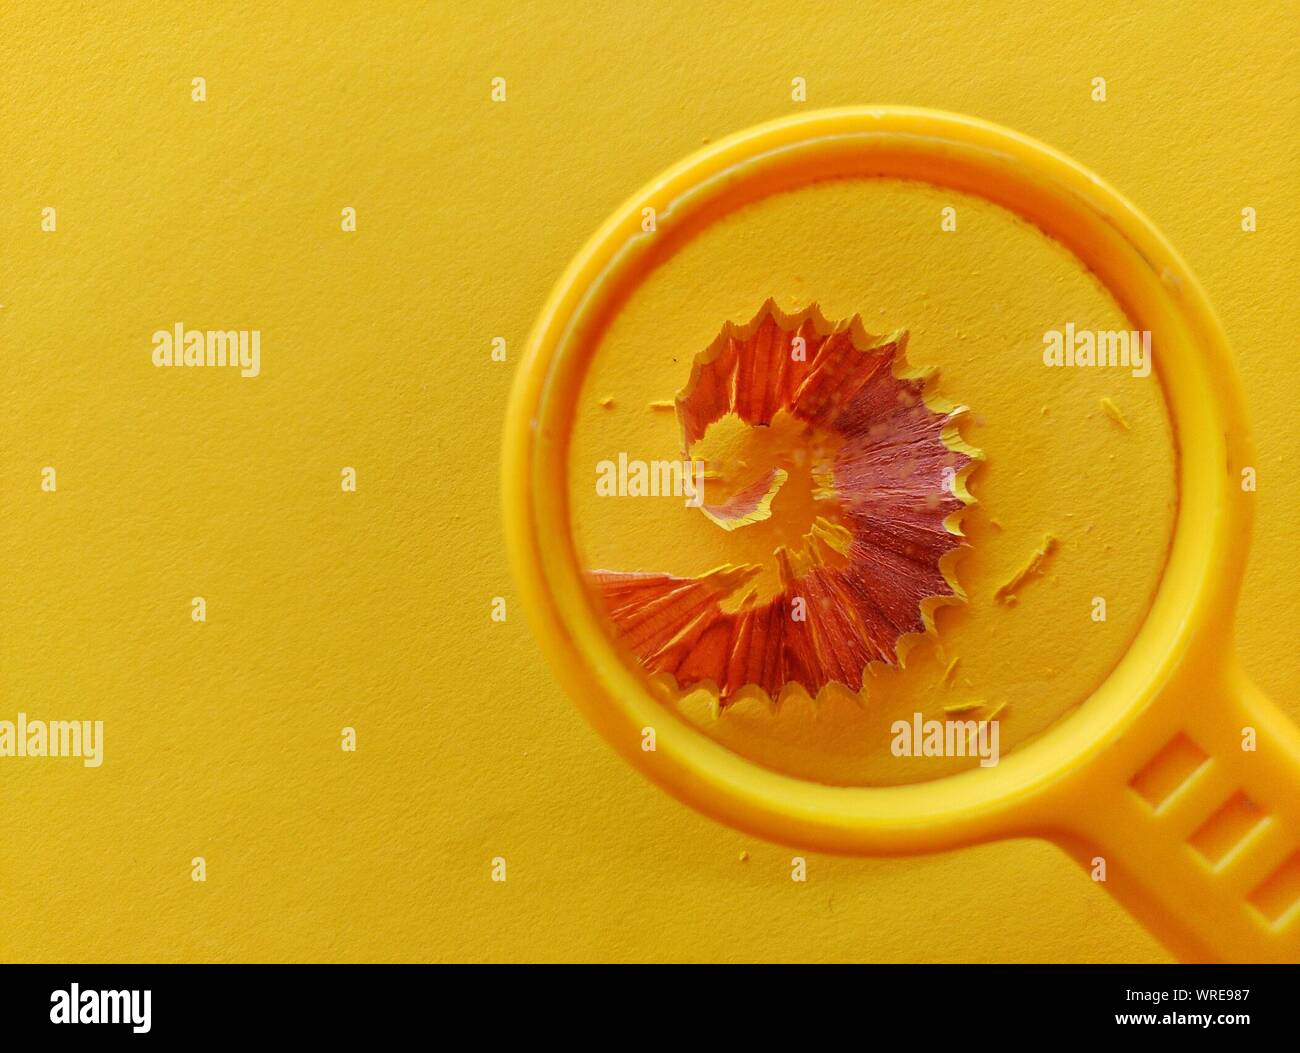 Pencil Shavings Being Magnified By Magnifying Glass Stock Photo